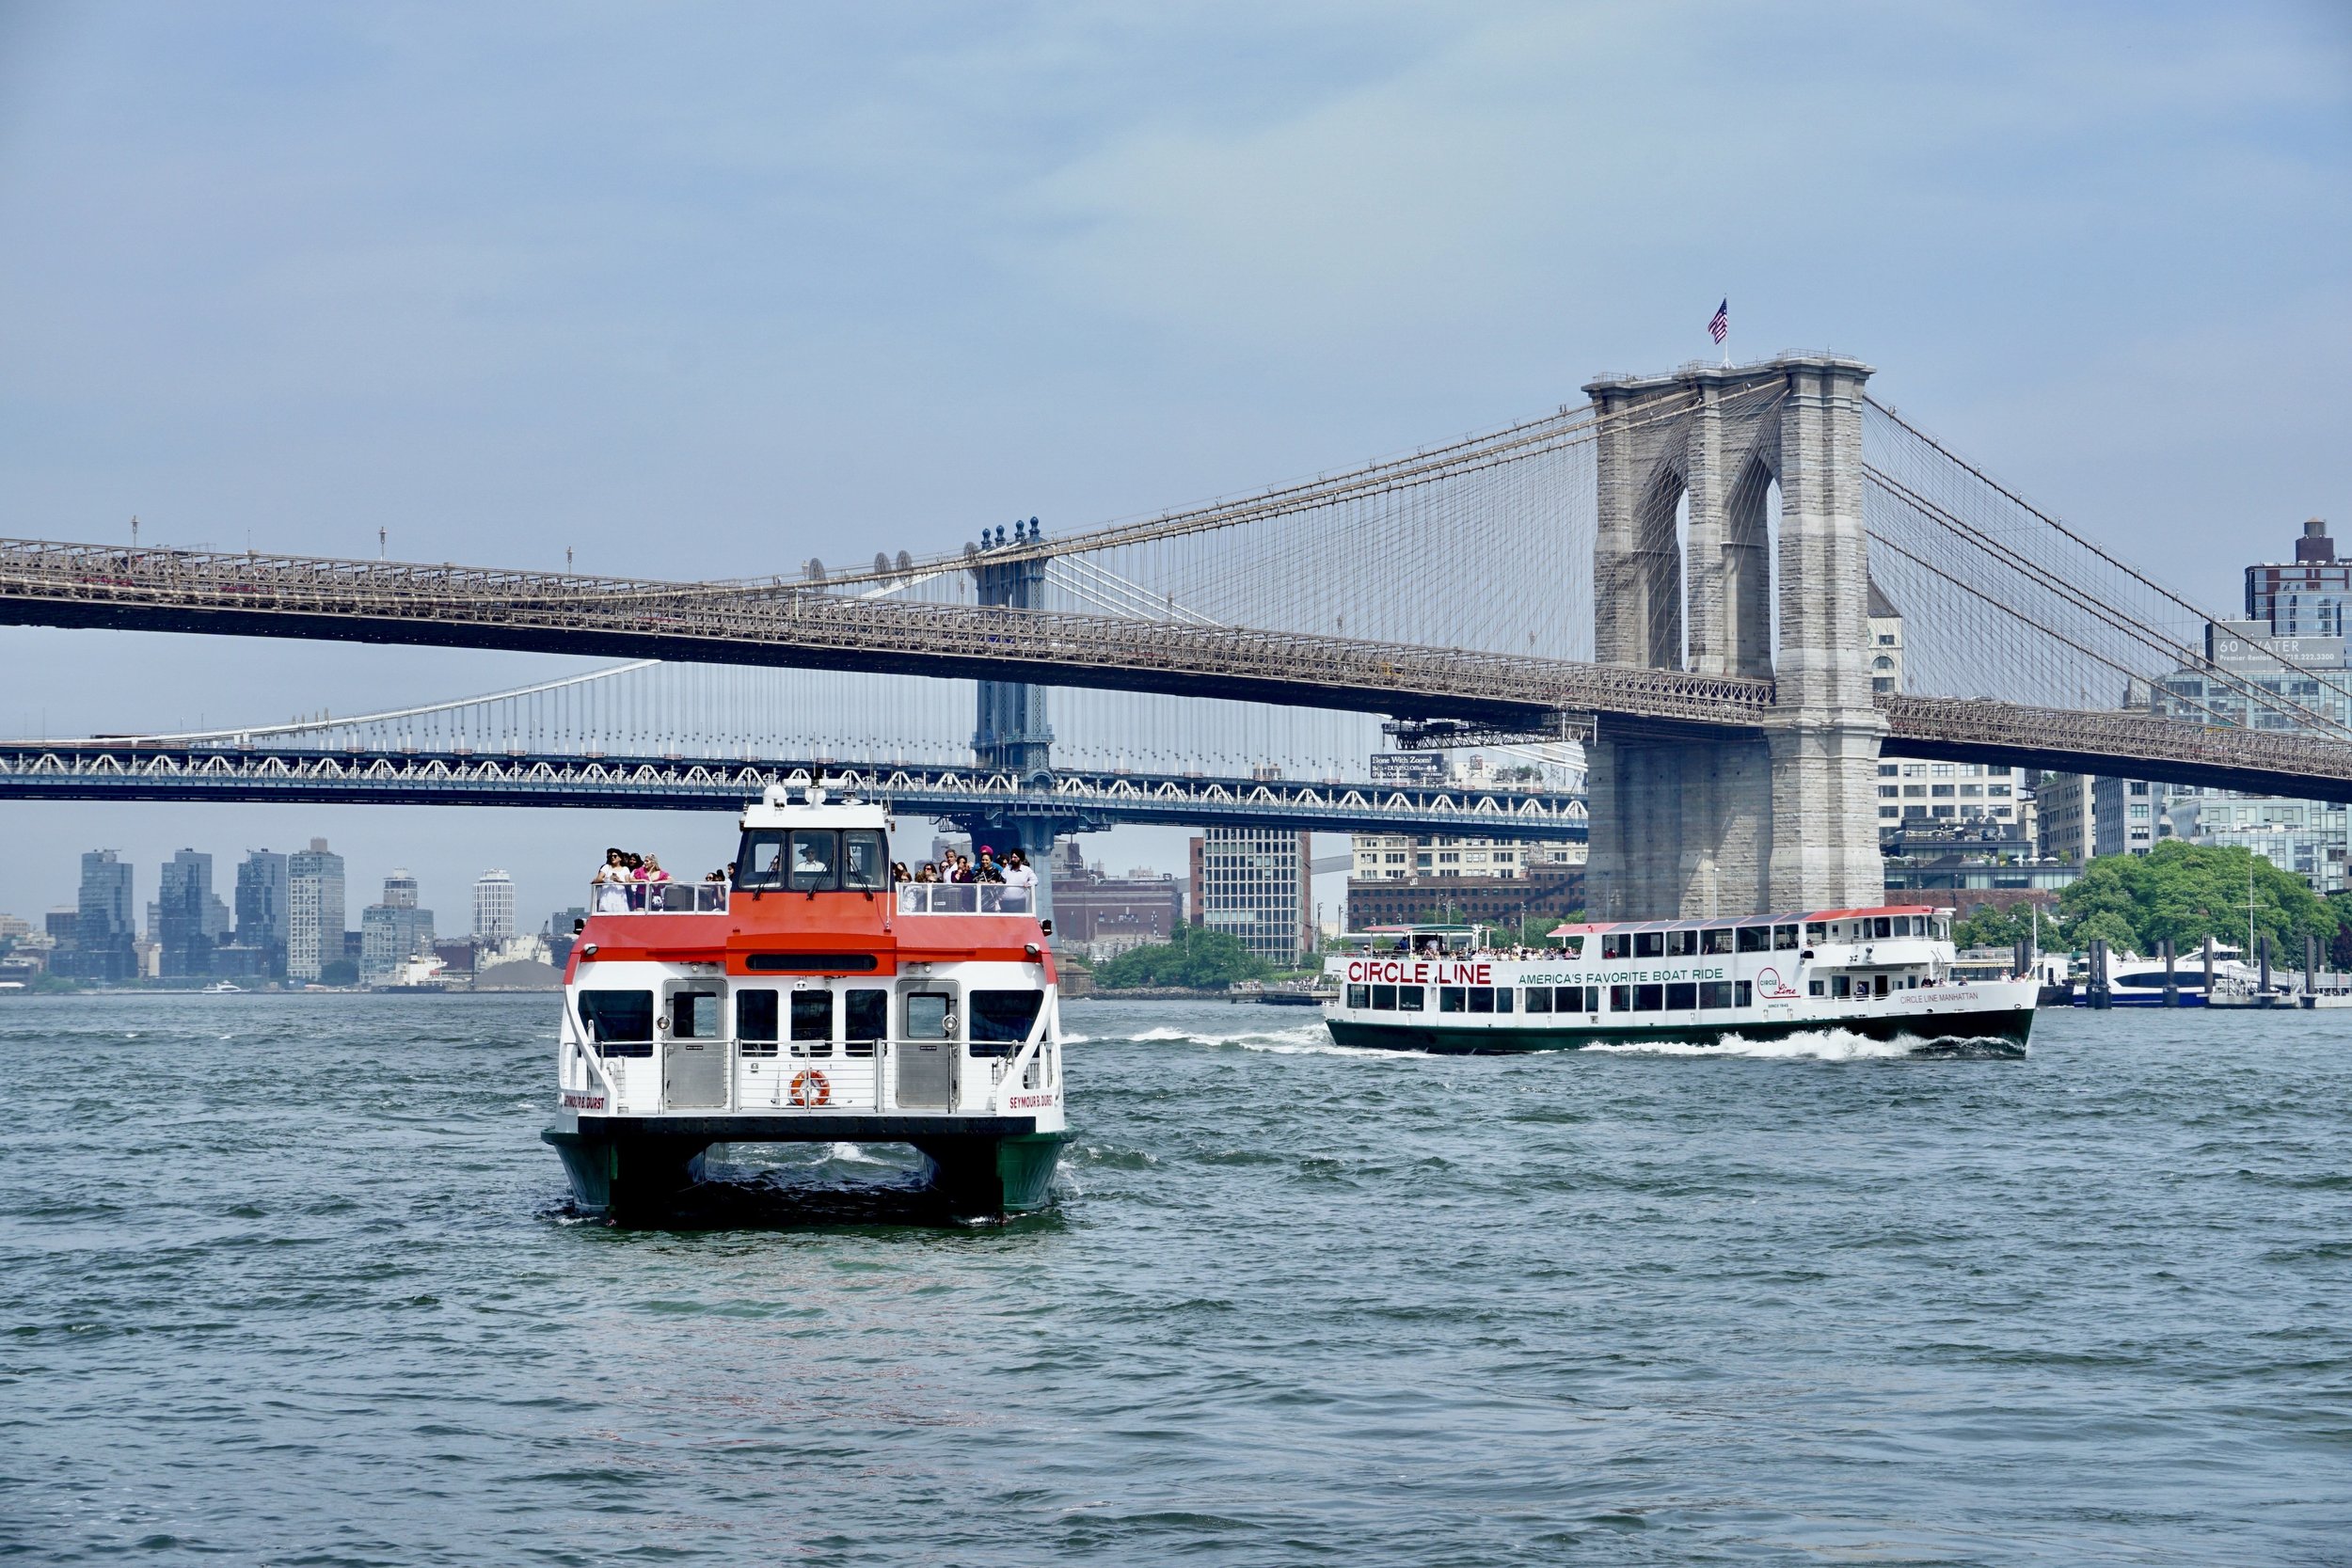 Take a trip on The East River